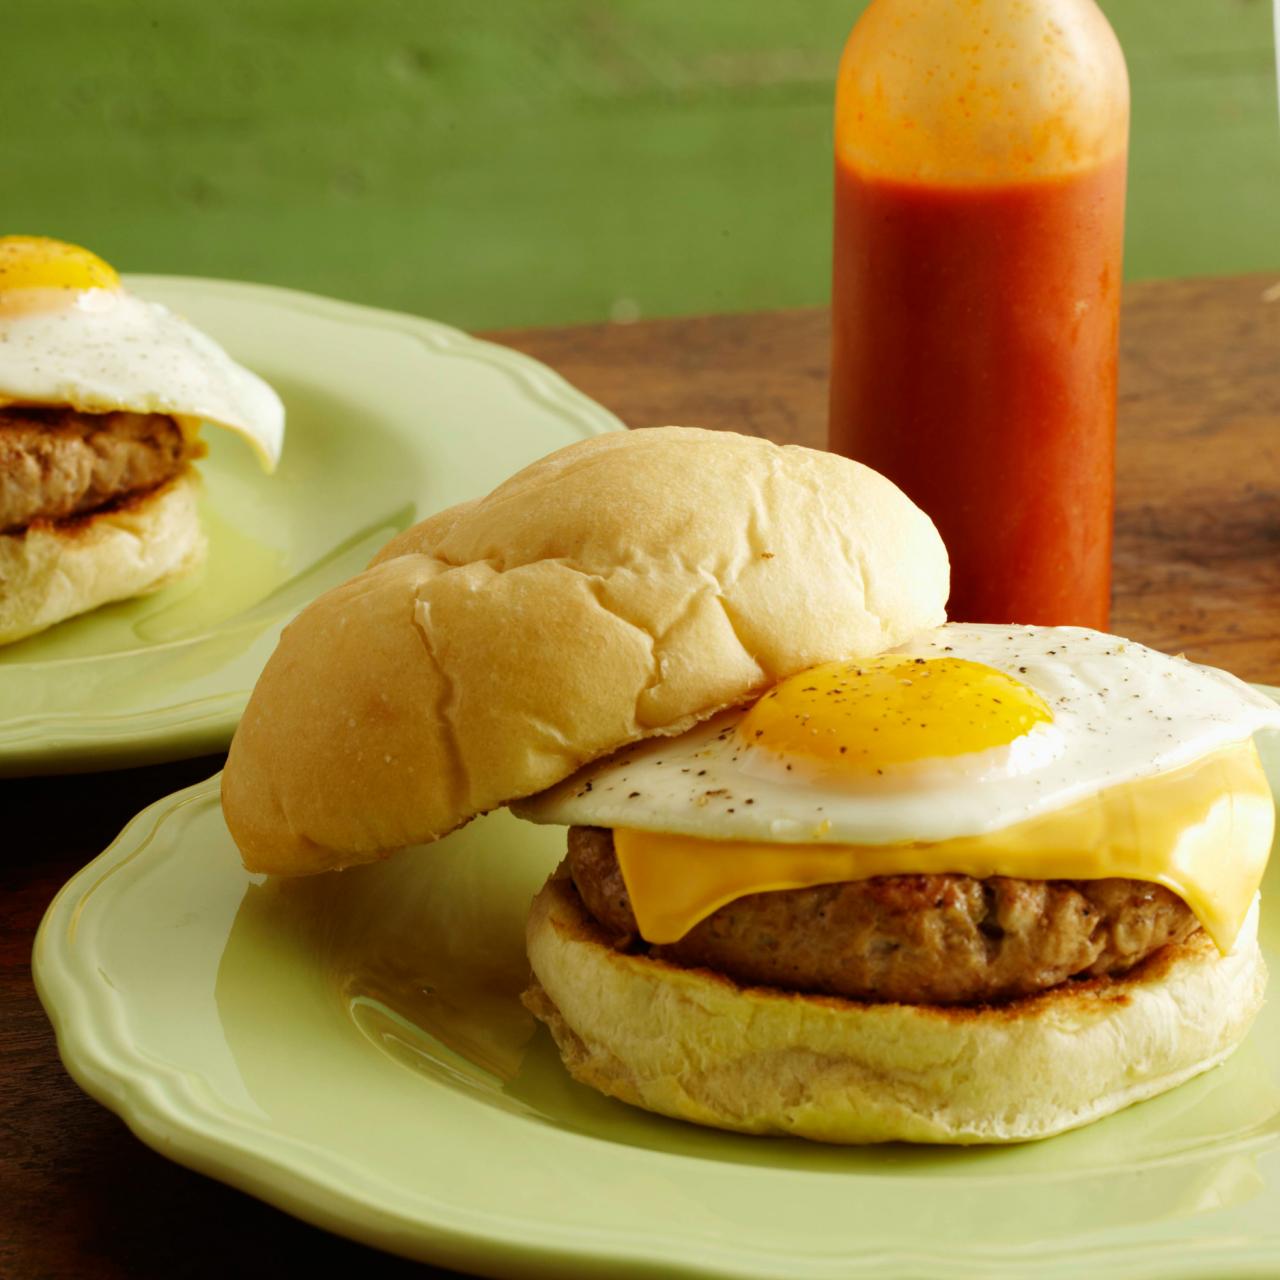 Smashed Sausage Breakfast Sandwich with Swiss Cheese